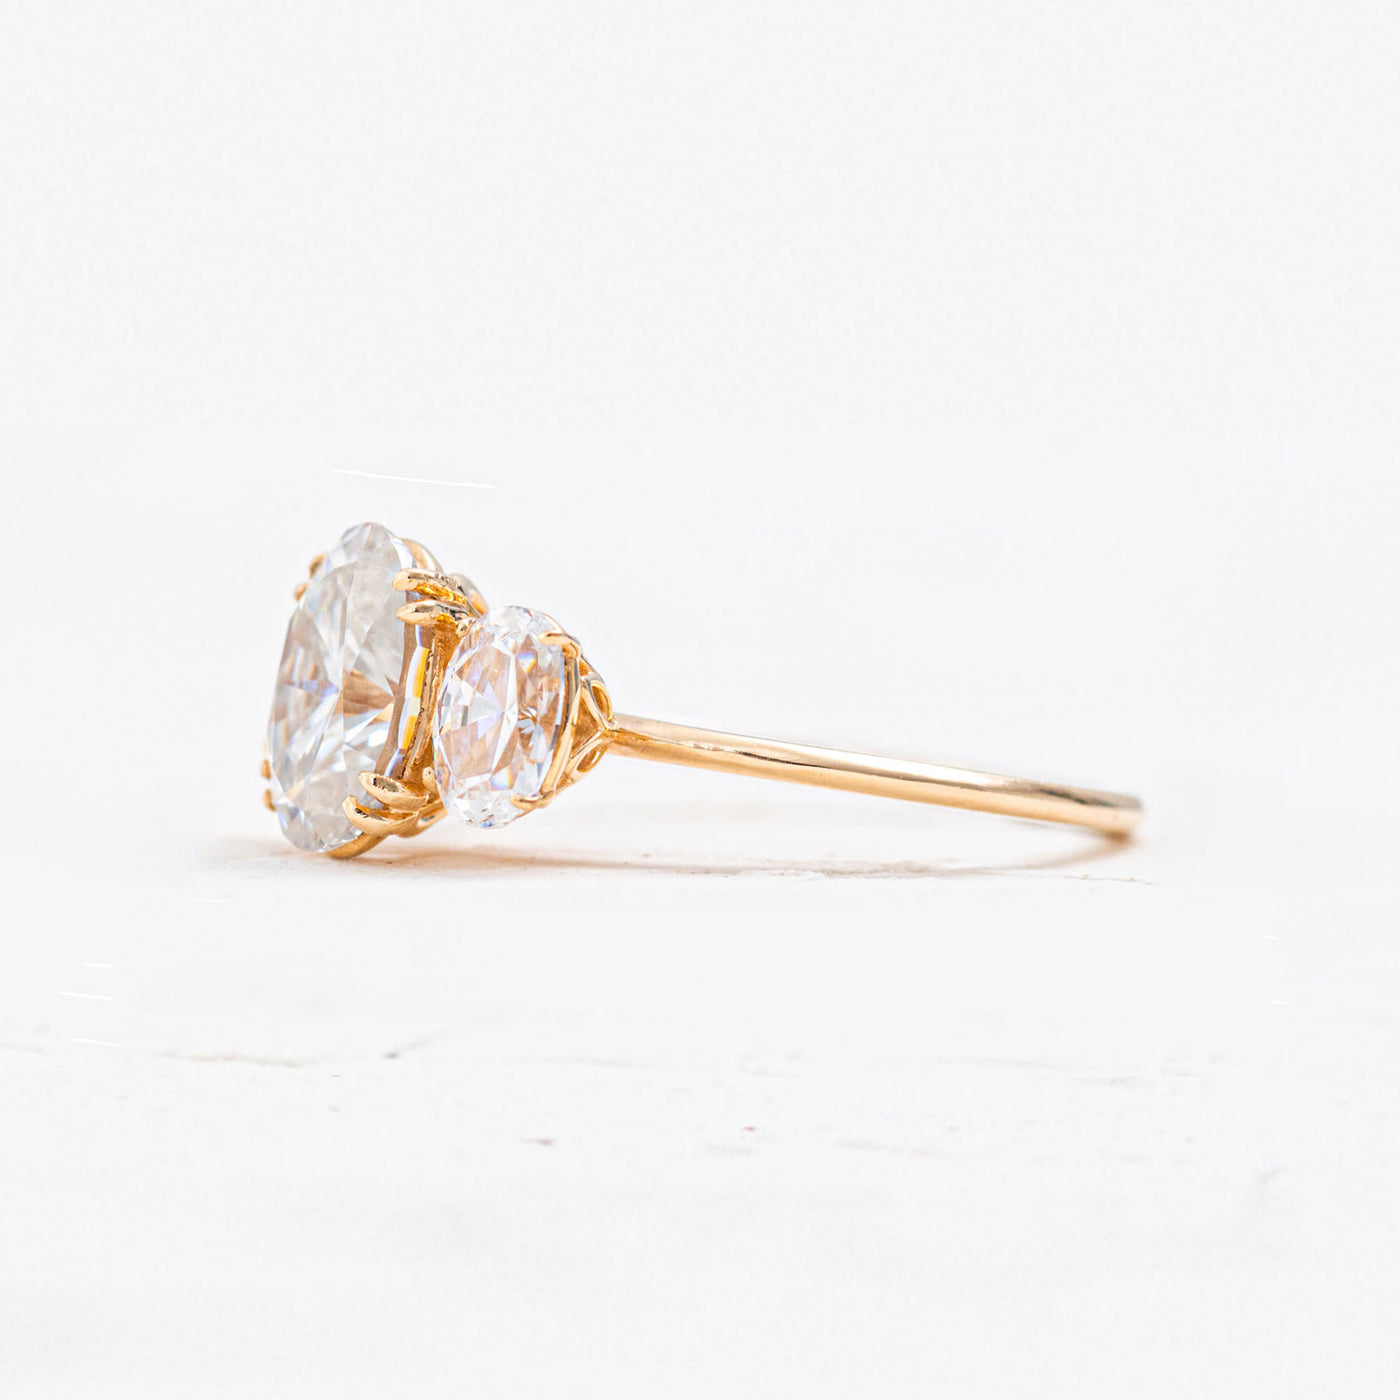 Isabel | 2.5 Carat TW Three Stone Oval Cut Engagement Ring in 14kt White, Rose, or Yellow Gold